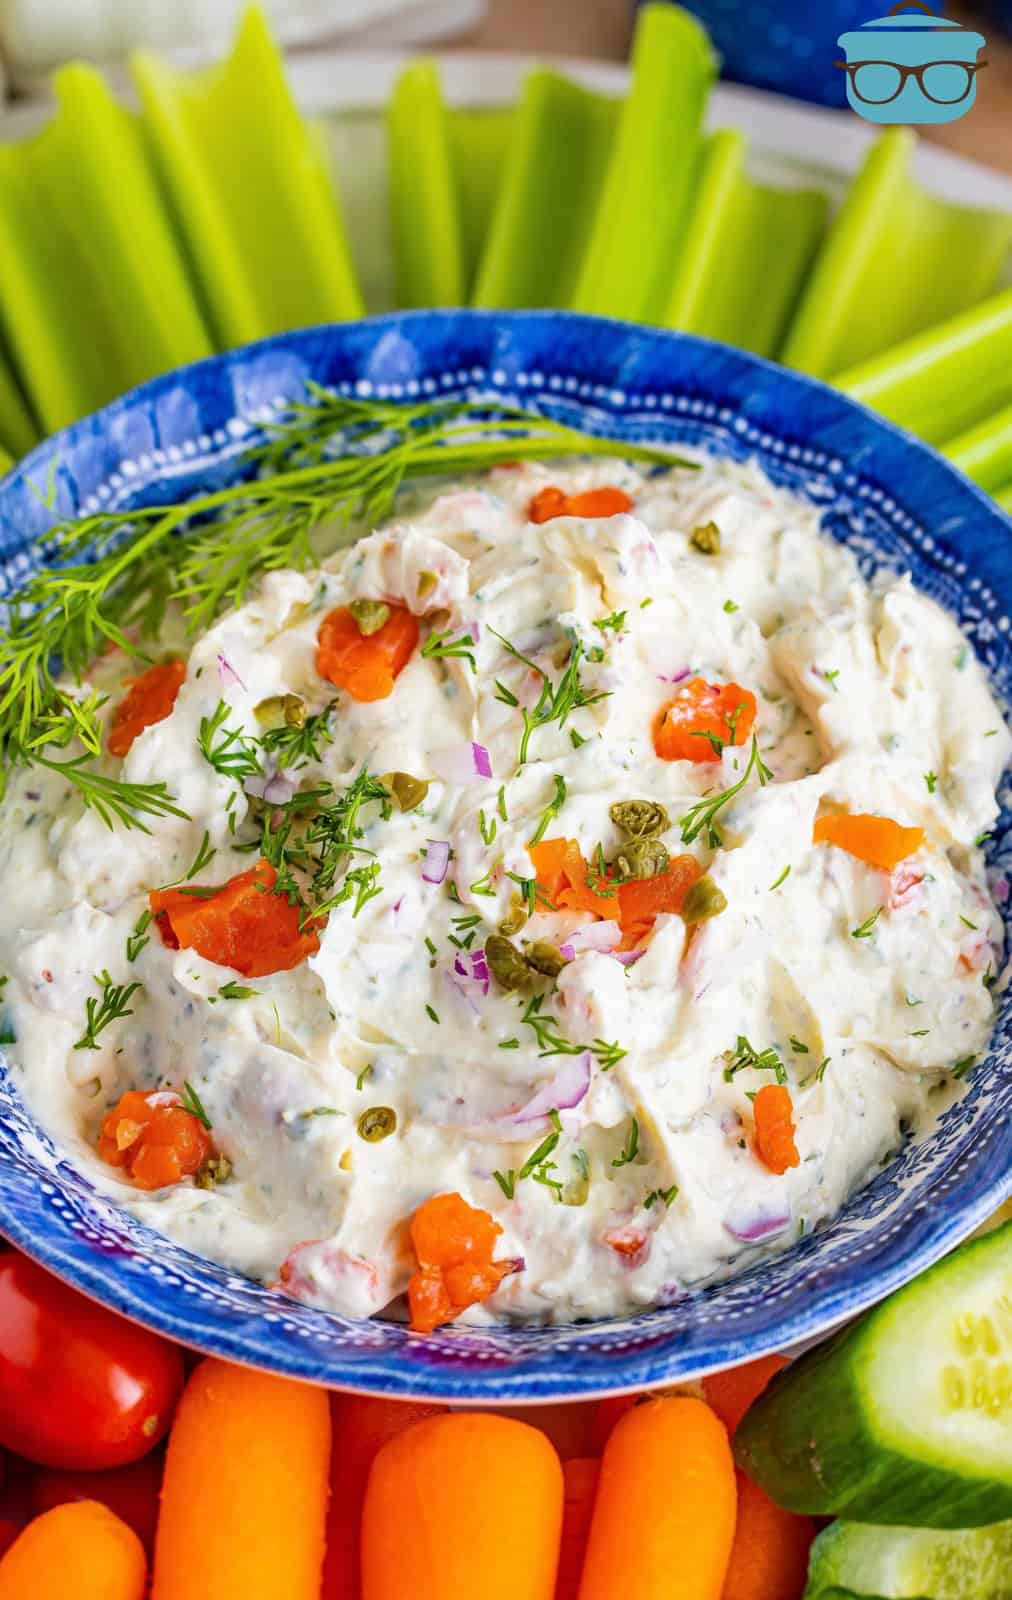 A blue serving bowl with smoked salmon dip and some vegetables around it for dipping.